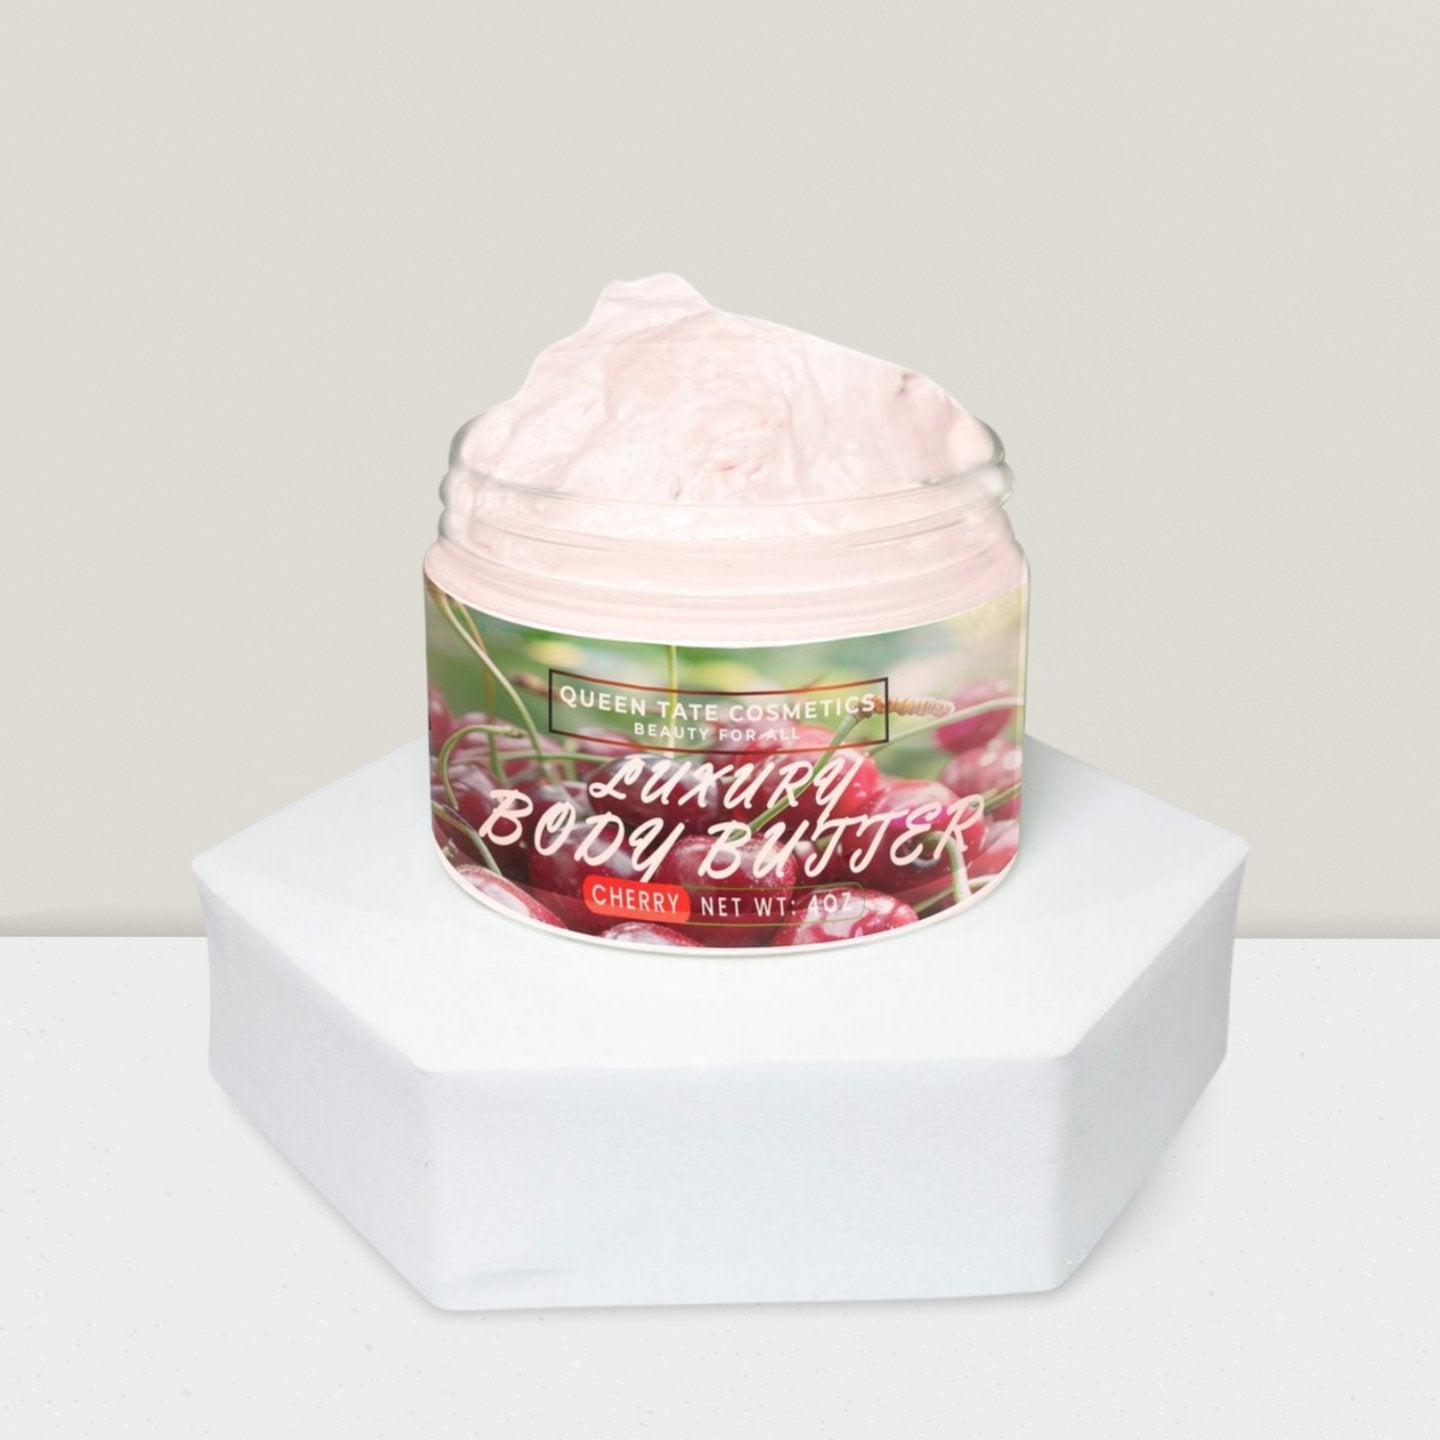 Cherry-Handcrafted Body Butter - Queen Tate CosmeticsHandcrafted Luxury Body ButterCherry-Handcrafted Body ButterHandcrafted Luxury Body ButterQueen Tate Cosmetics 8 oz